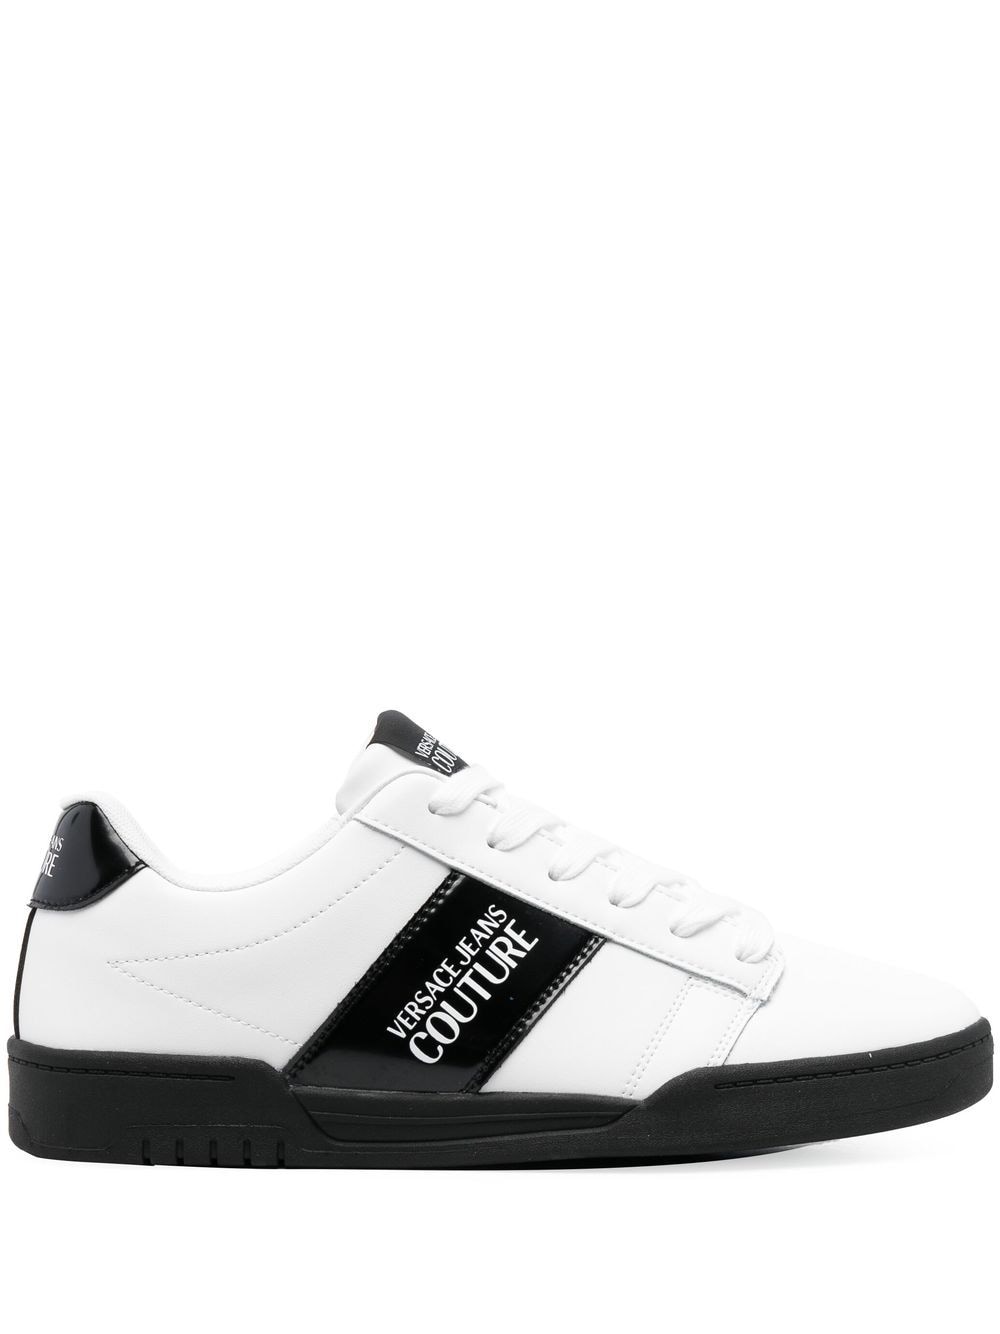 Versace Jeans Couture logo-print contrasting low-top sneakers - White